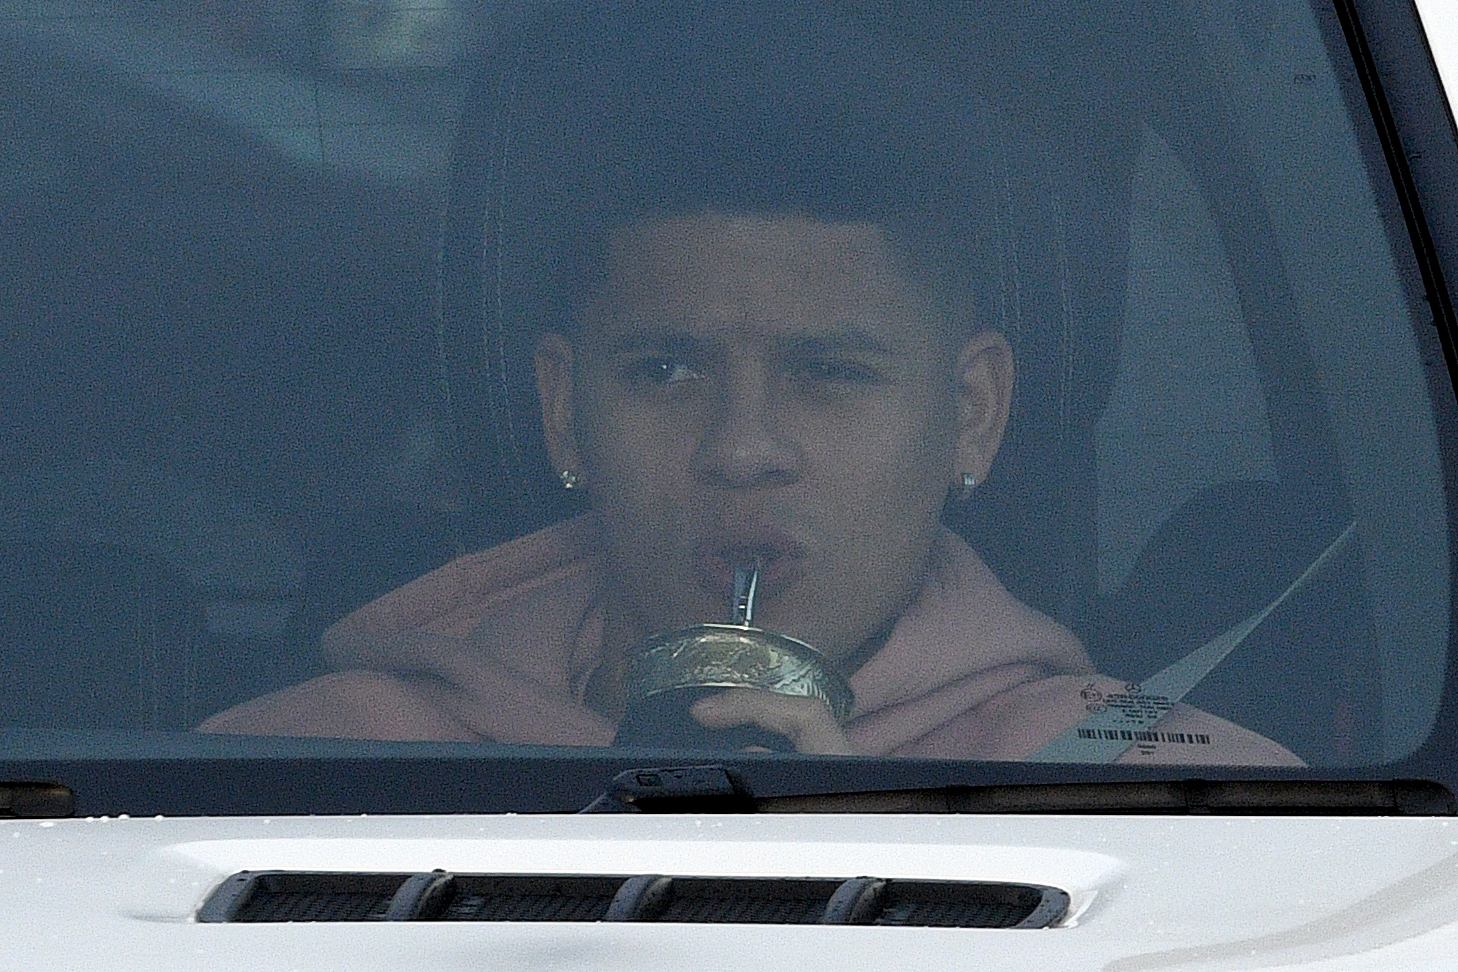 Manchester United's Argentinian defender Marcos Rojo arrives at the club's Carrington Training complex in Manchester, north west England on December 20, 2018. - Ole Gunnar Solskjaer was Wednesday handed the daunting task of saving Manchester United's season after the disastrous final few months of Jose Mourinho's reign. (Photo by Oli SCARFF / AFP)        (Photo credit should read OLI SCARFF/AFP/Getty Images)